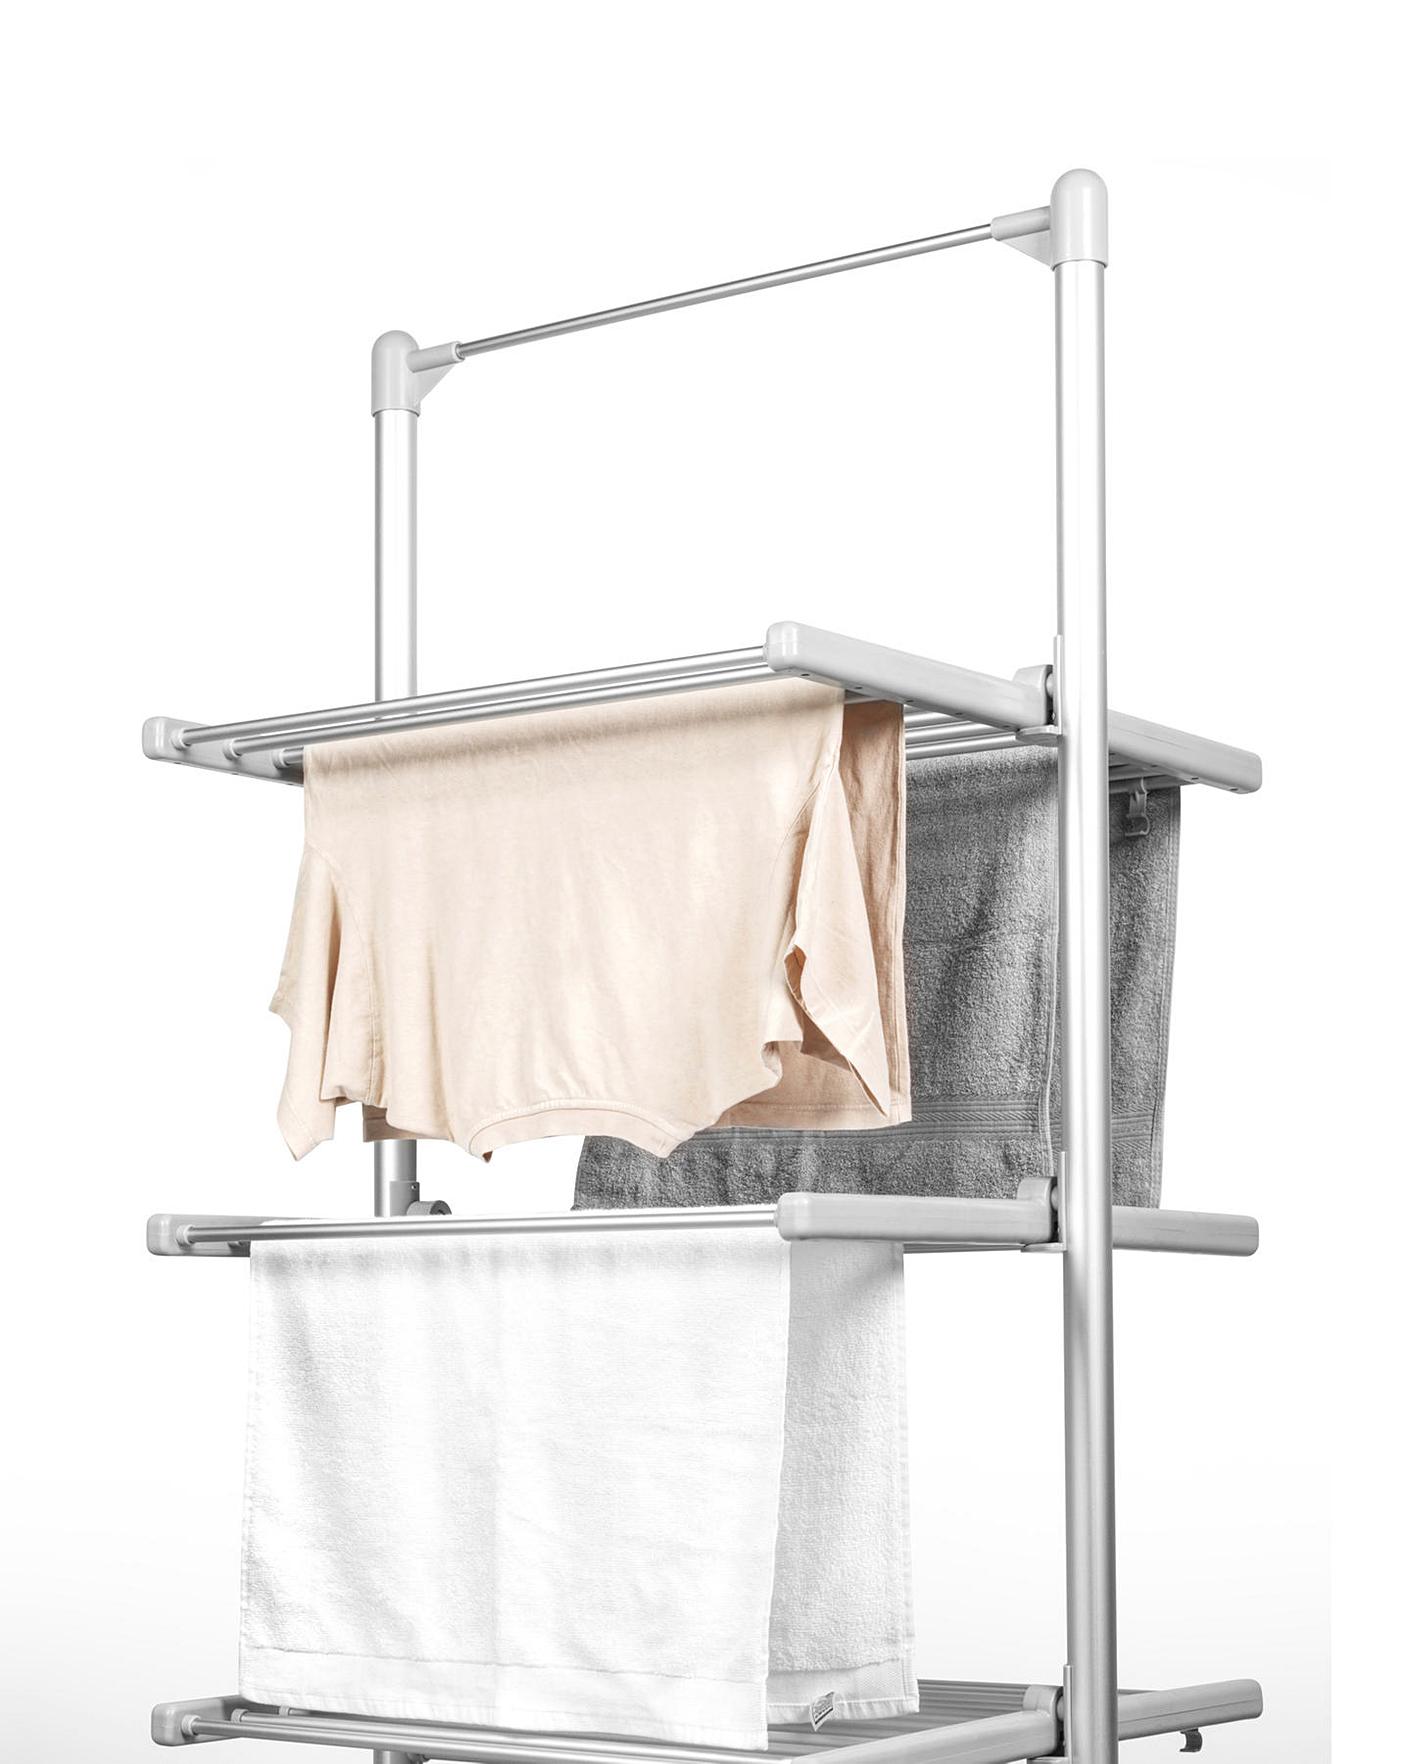 Dry-Soon Wall Mounted Heated Airer in clothes horses and airers at